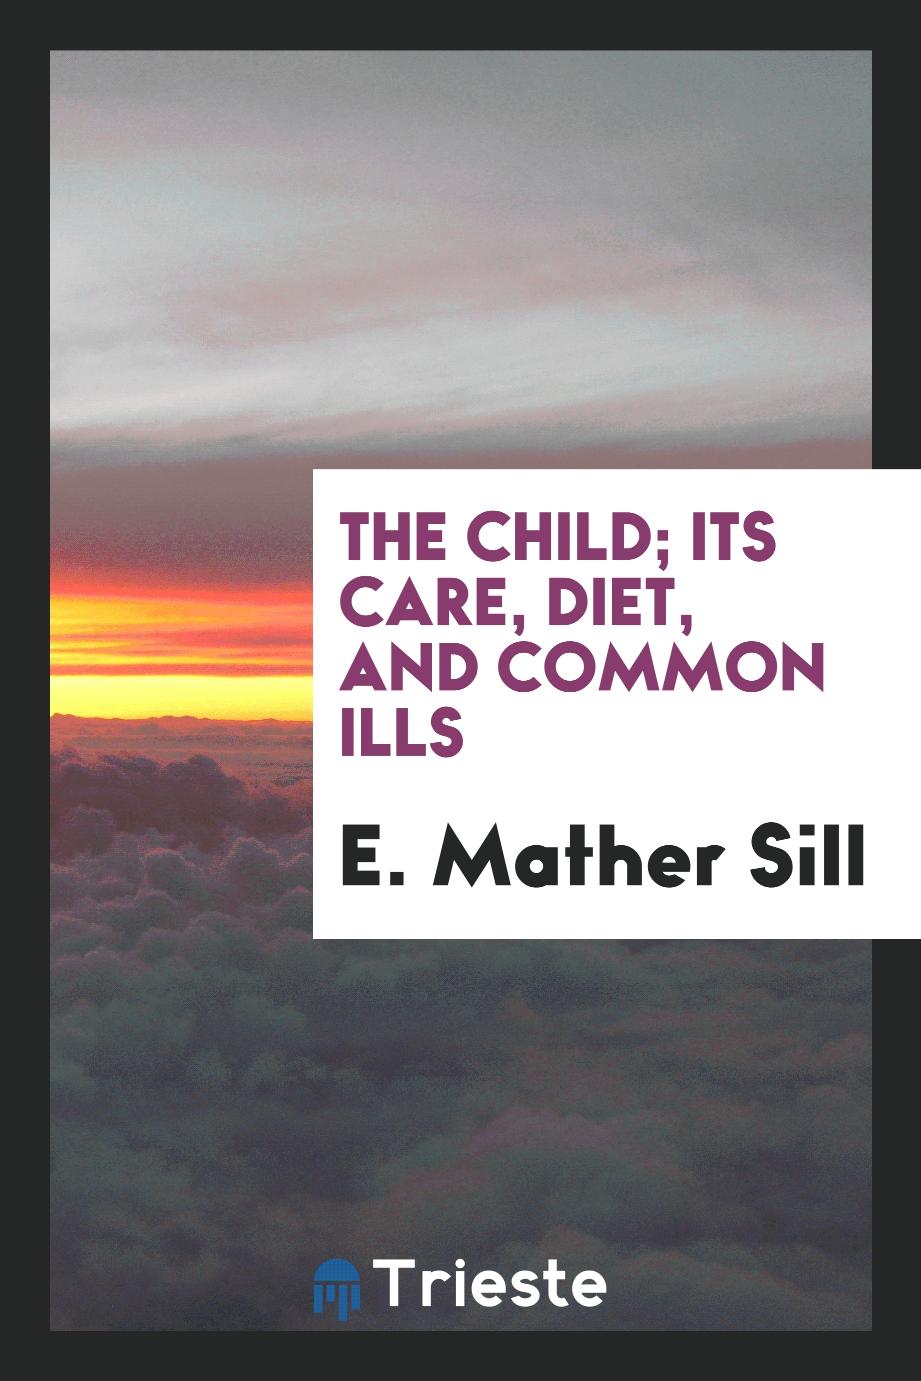 The child; its care, diet, and common ills